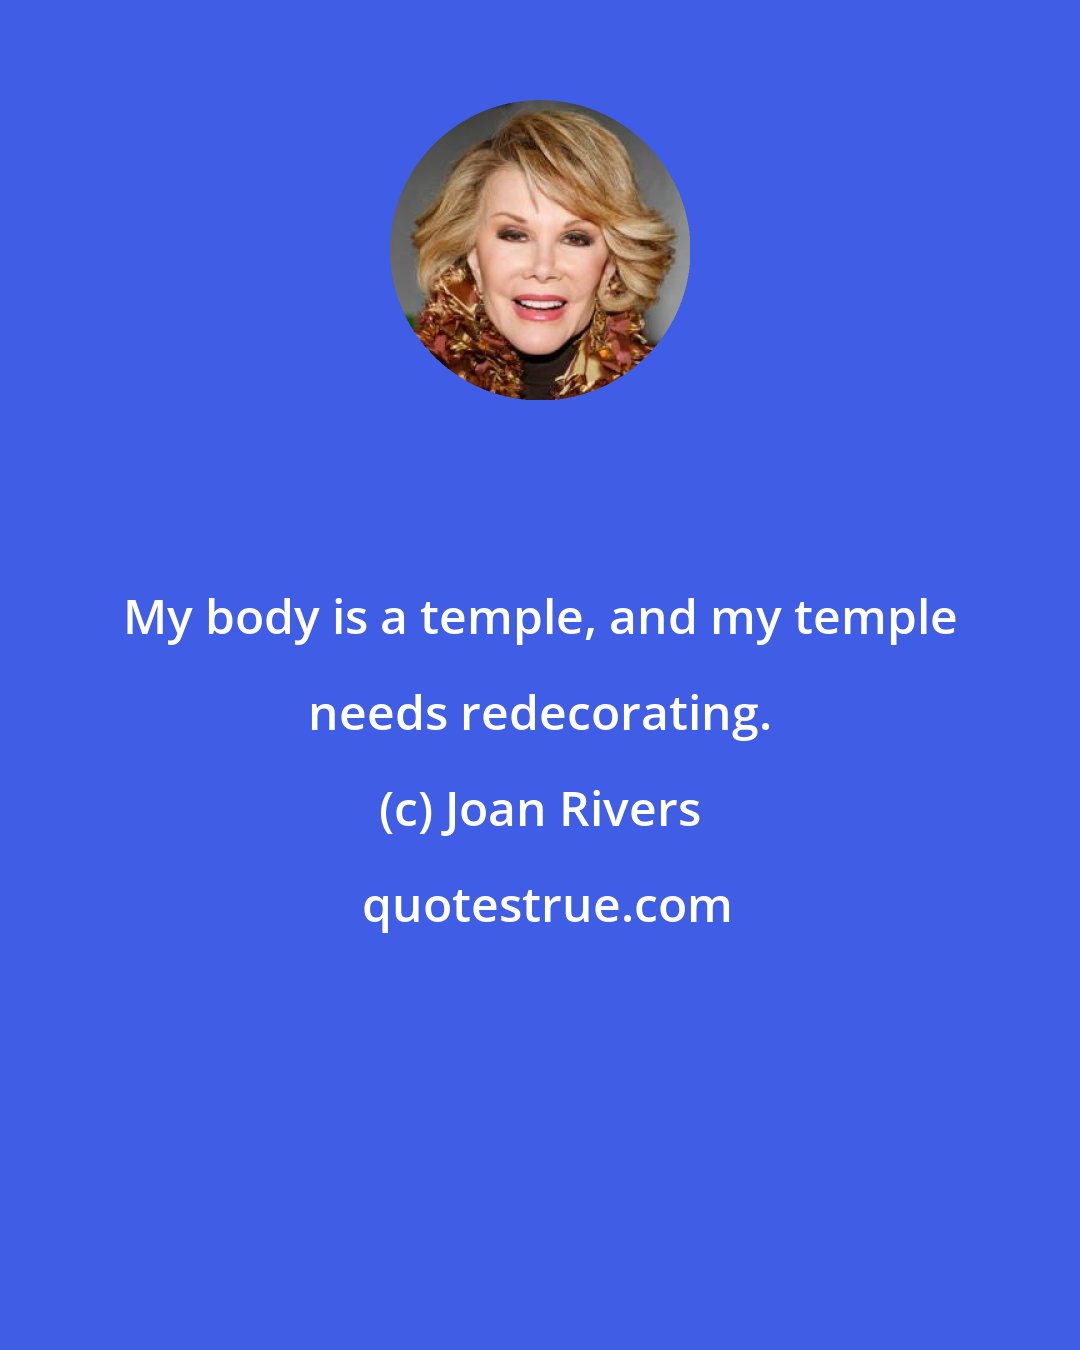 Joan Rivers: My body is a temple, and my temple needs redecorating.